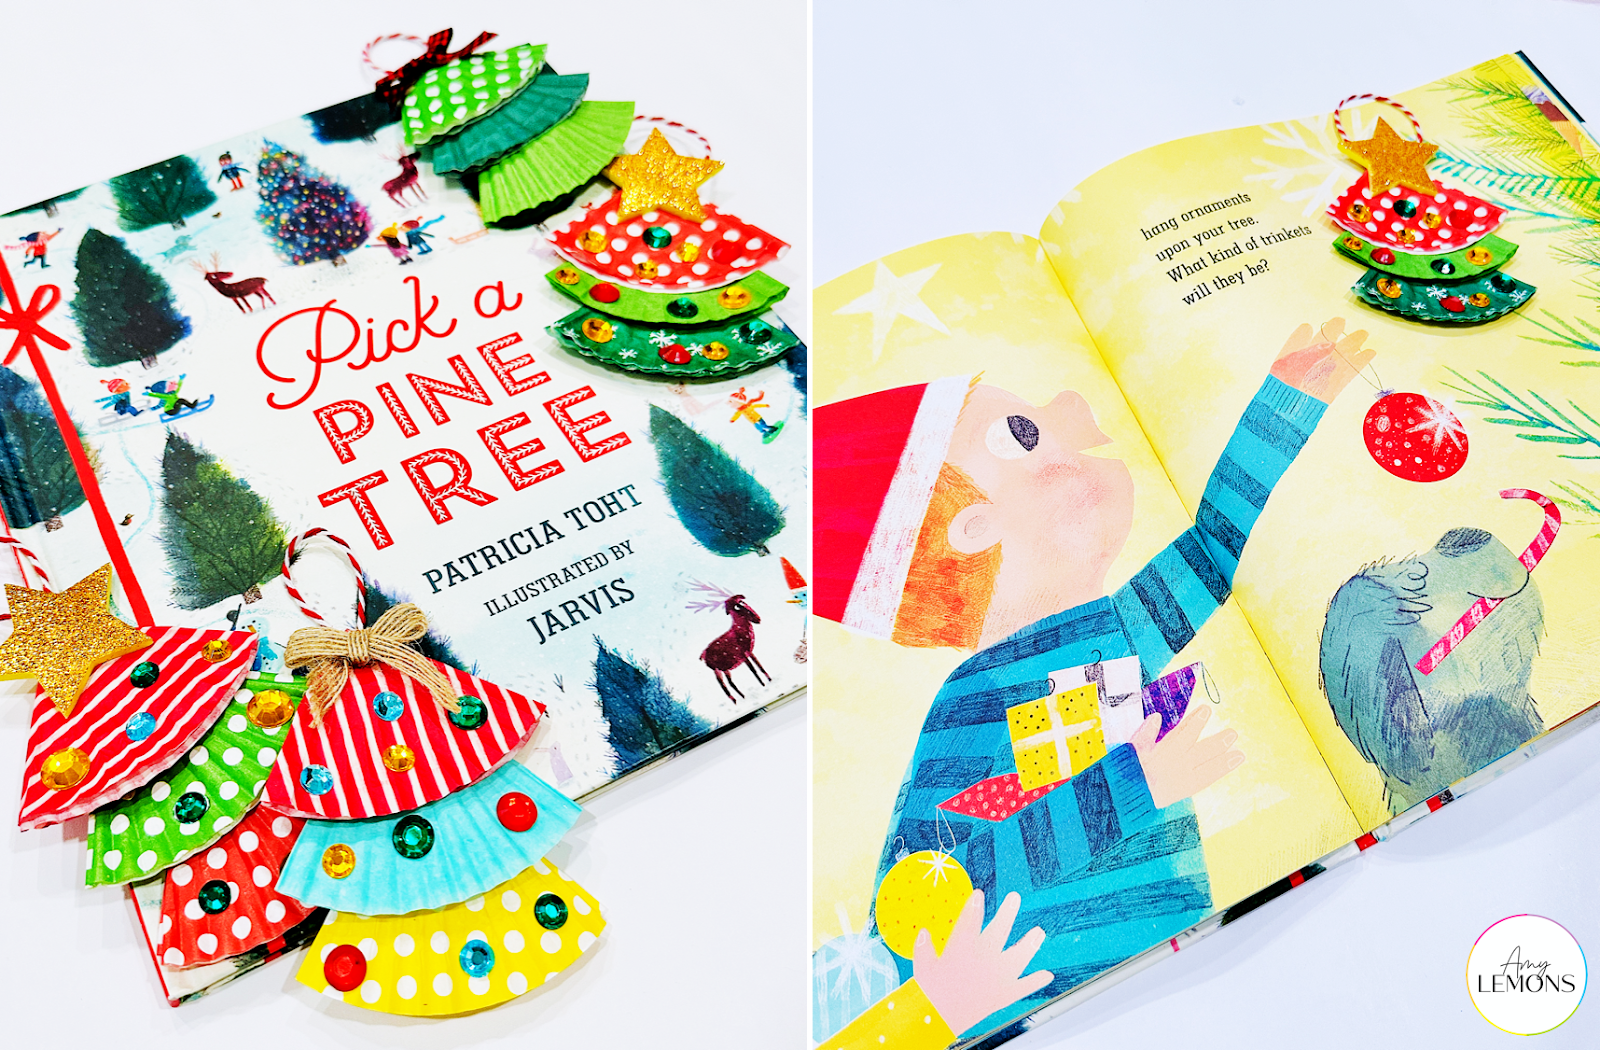 Christmas Tree Crafts for students with the book How to Pick a Pine Tree